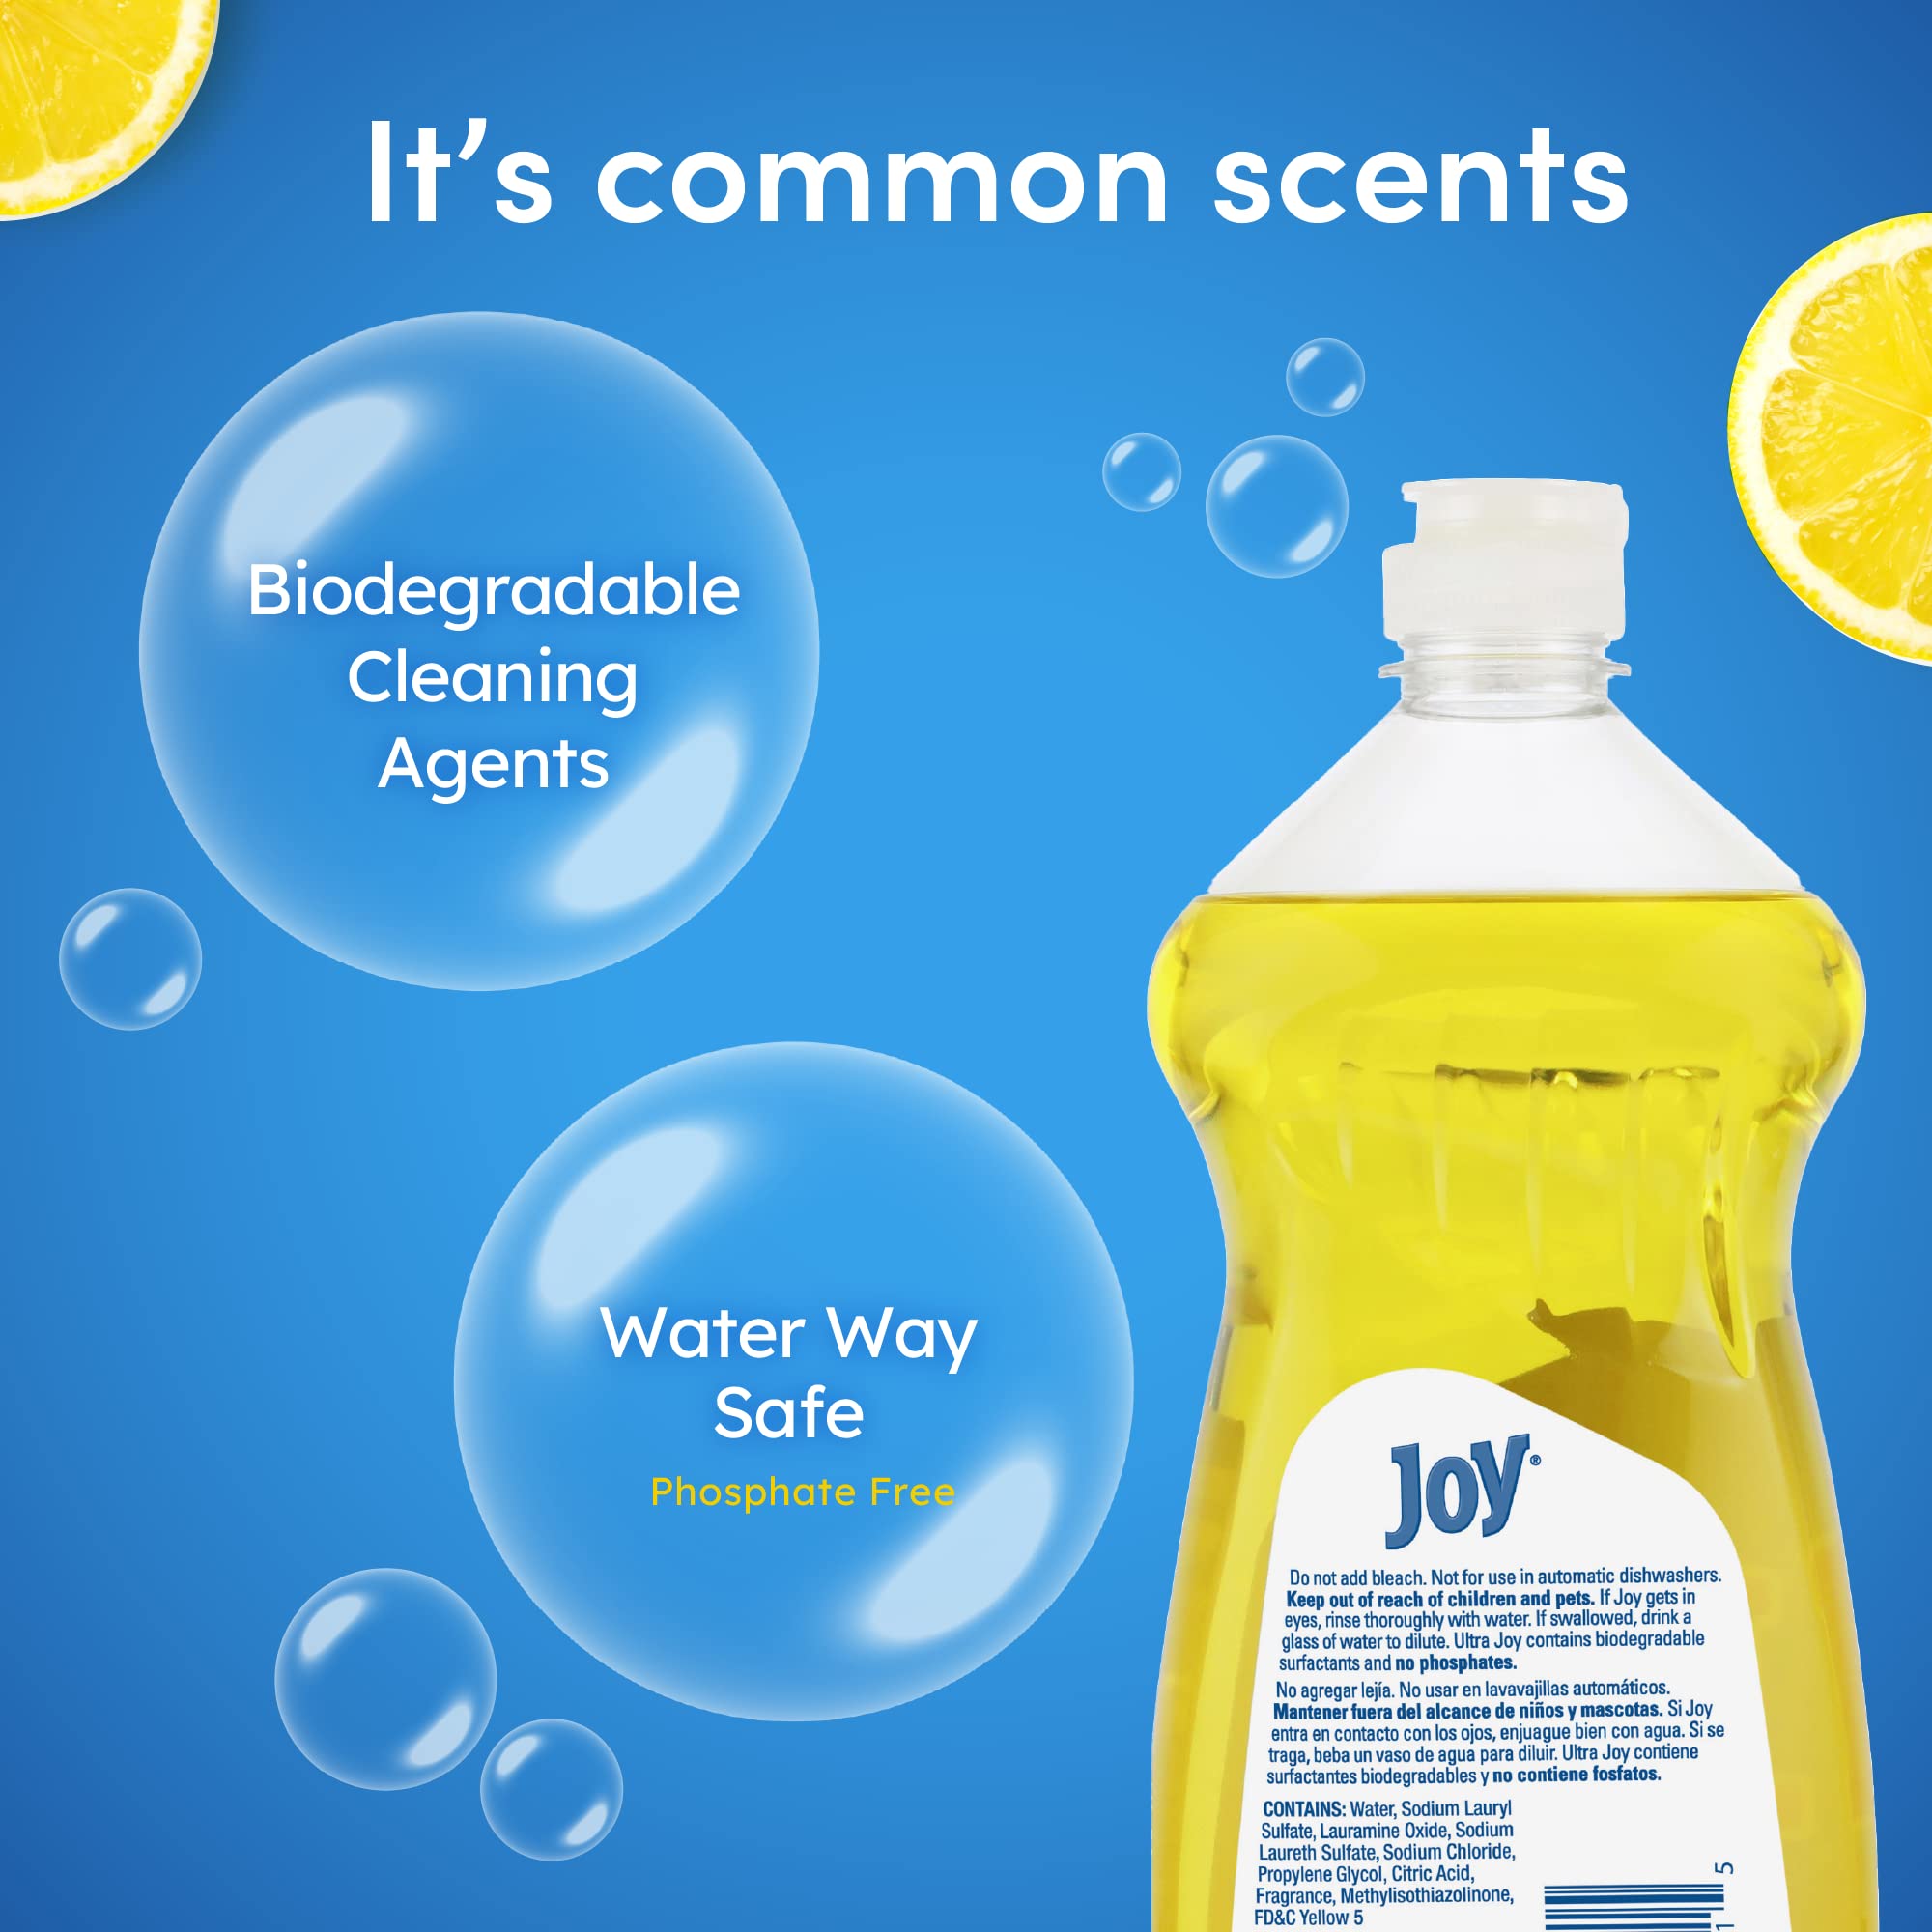 JOY Ultra Grease Cutting Dishwashing Dish Detergent Liquid Soap, Lemon Scent, 30 Ounce Pack of 3, Powerful Cleaning Agent